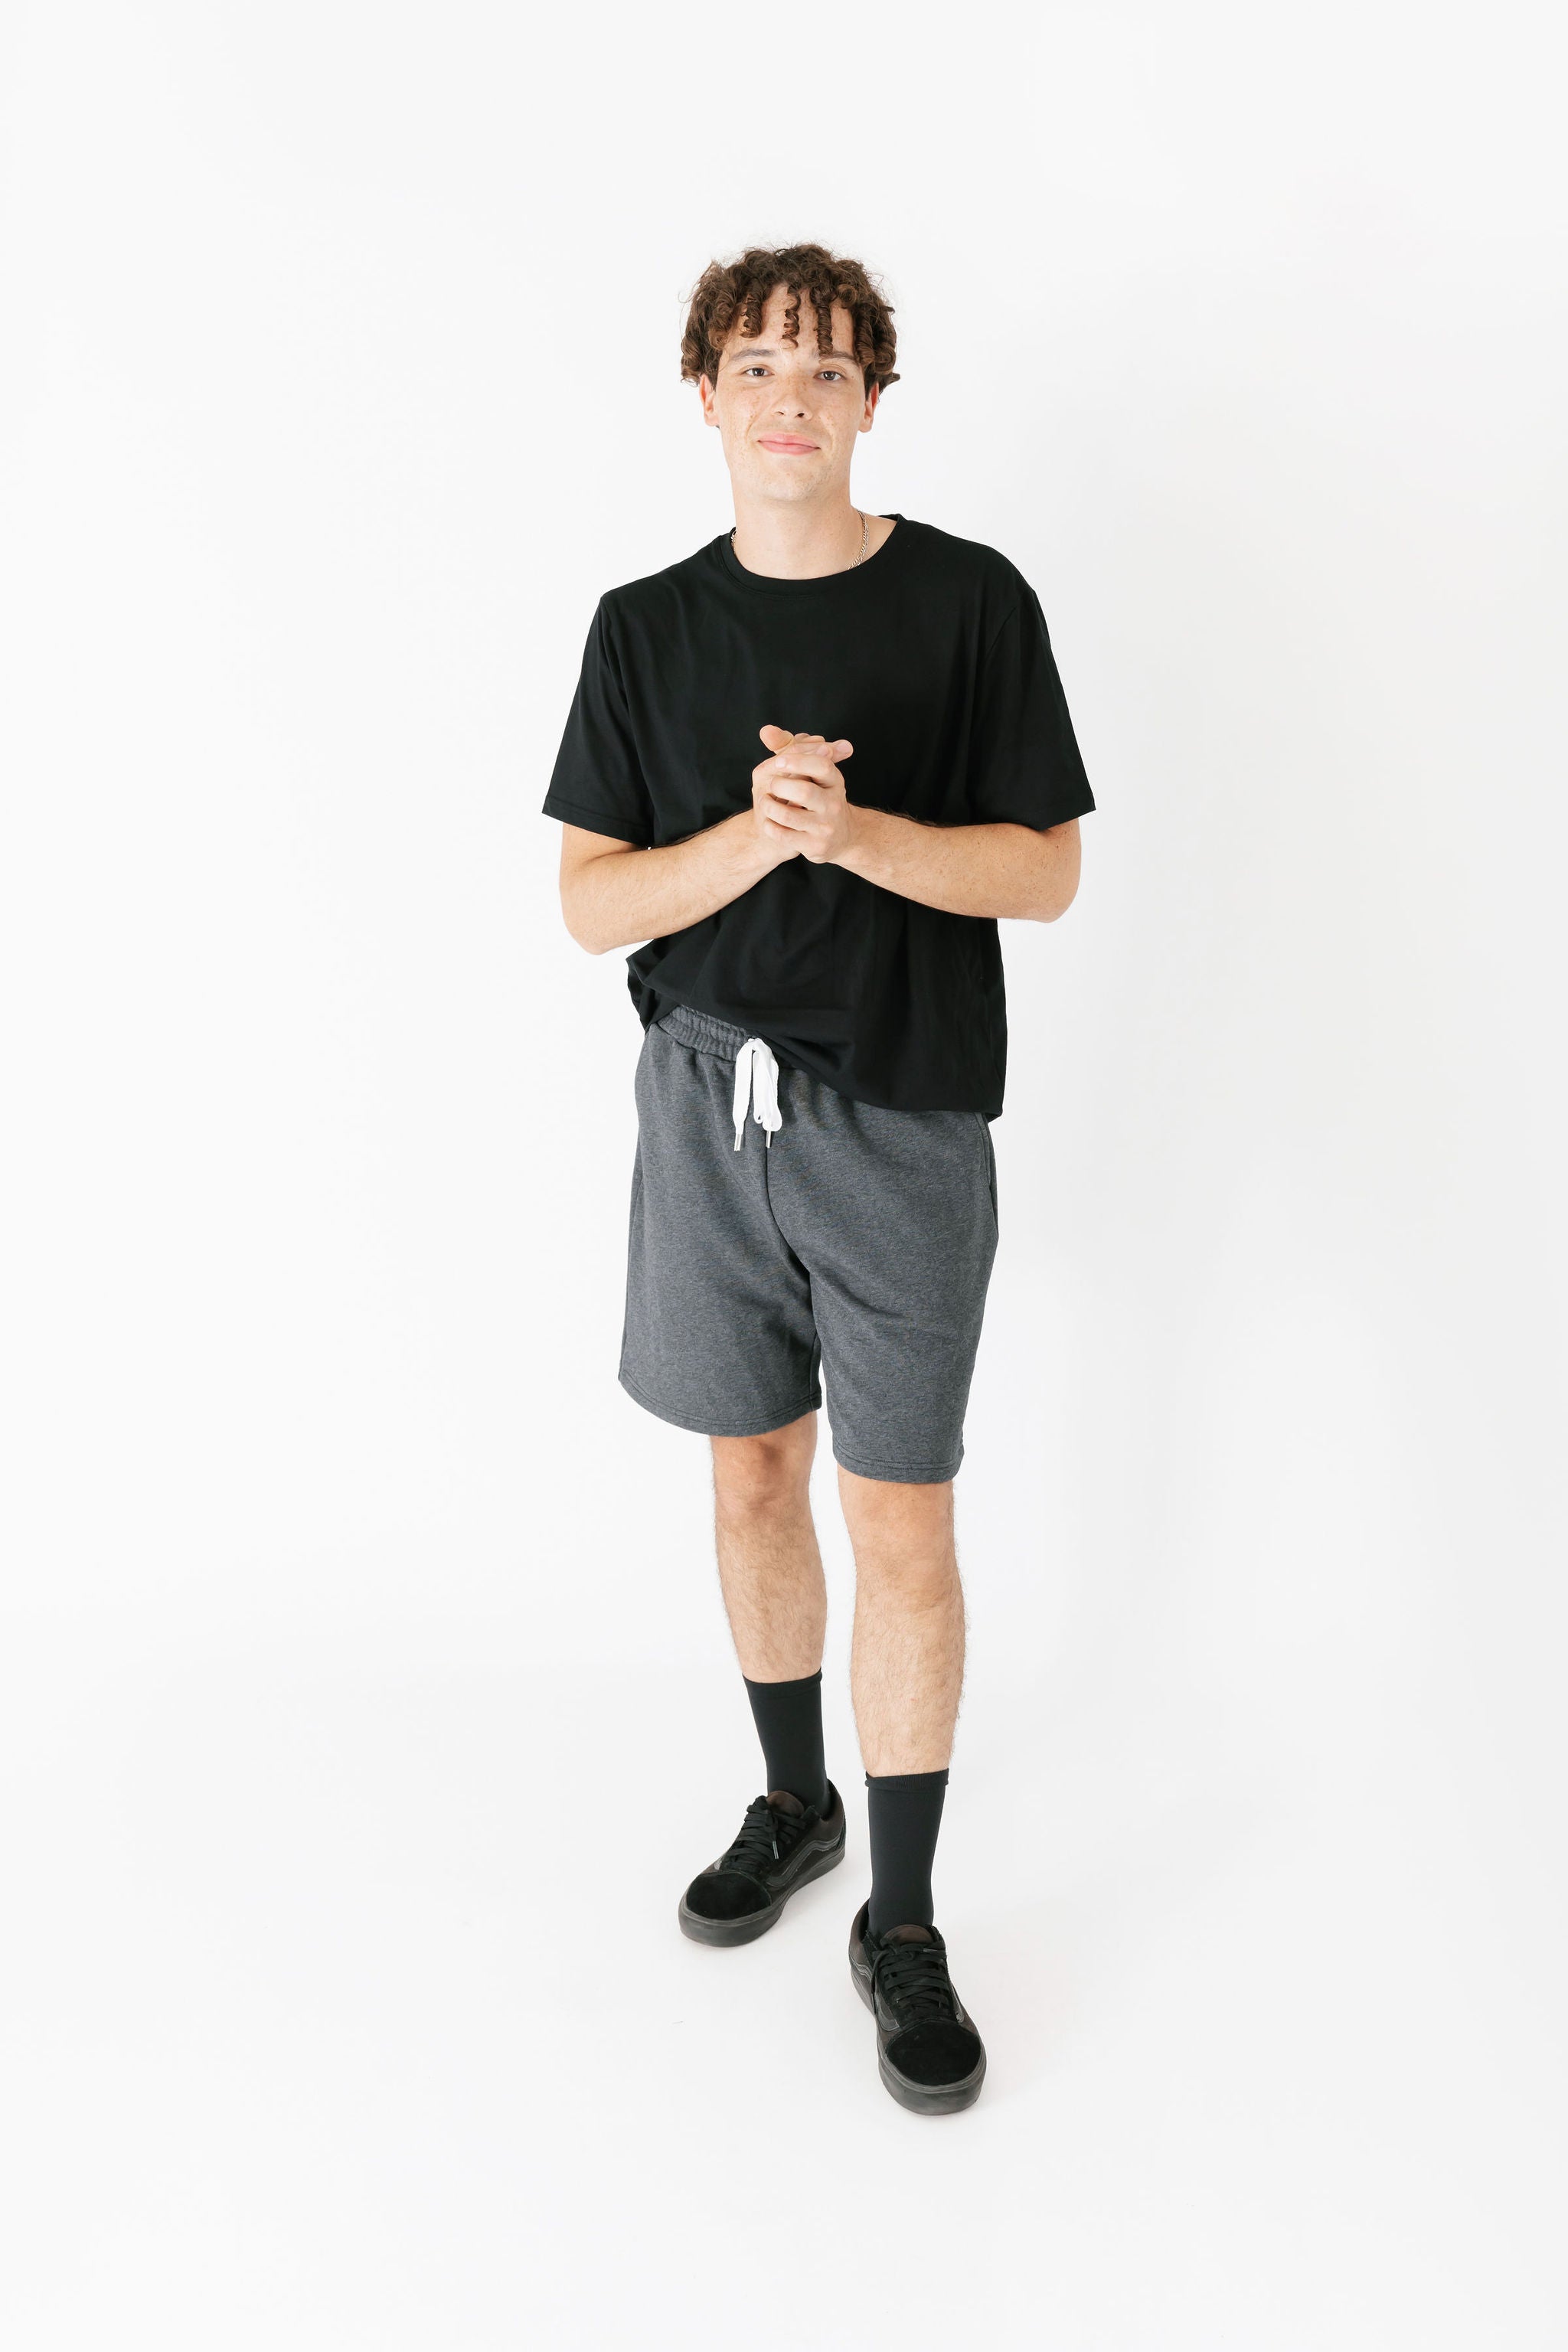 Chill Shorts in Charcoal Mix